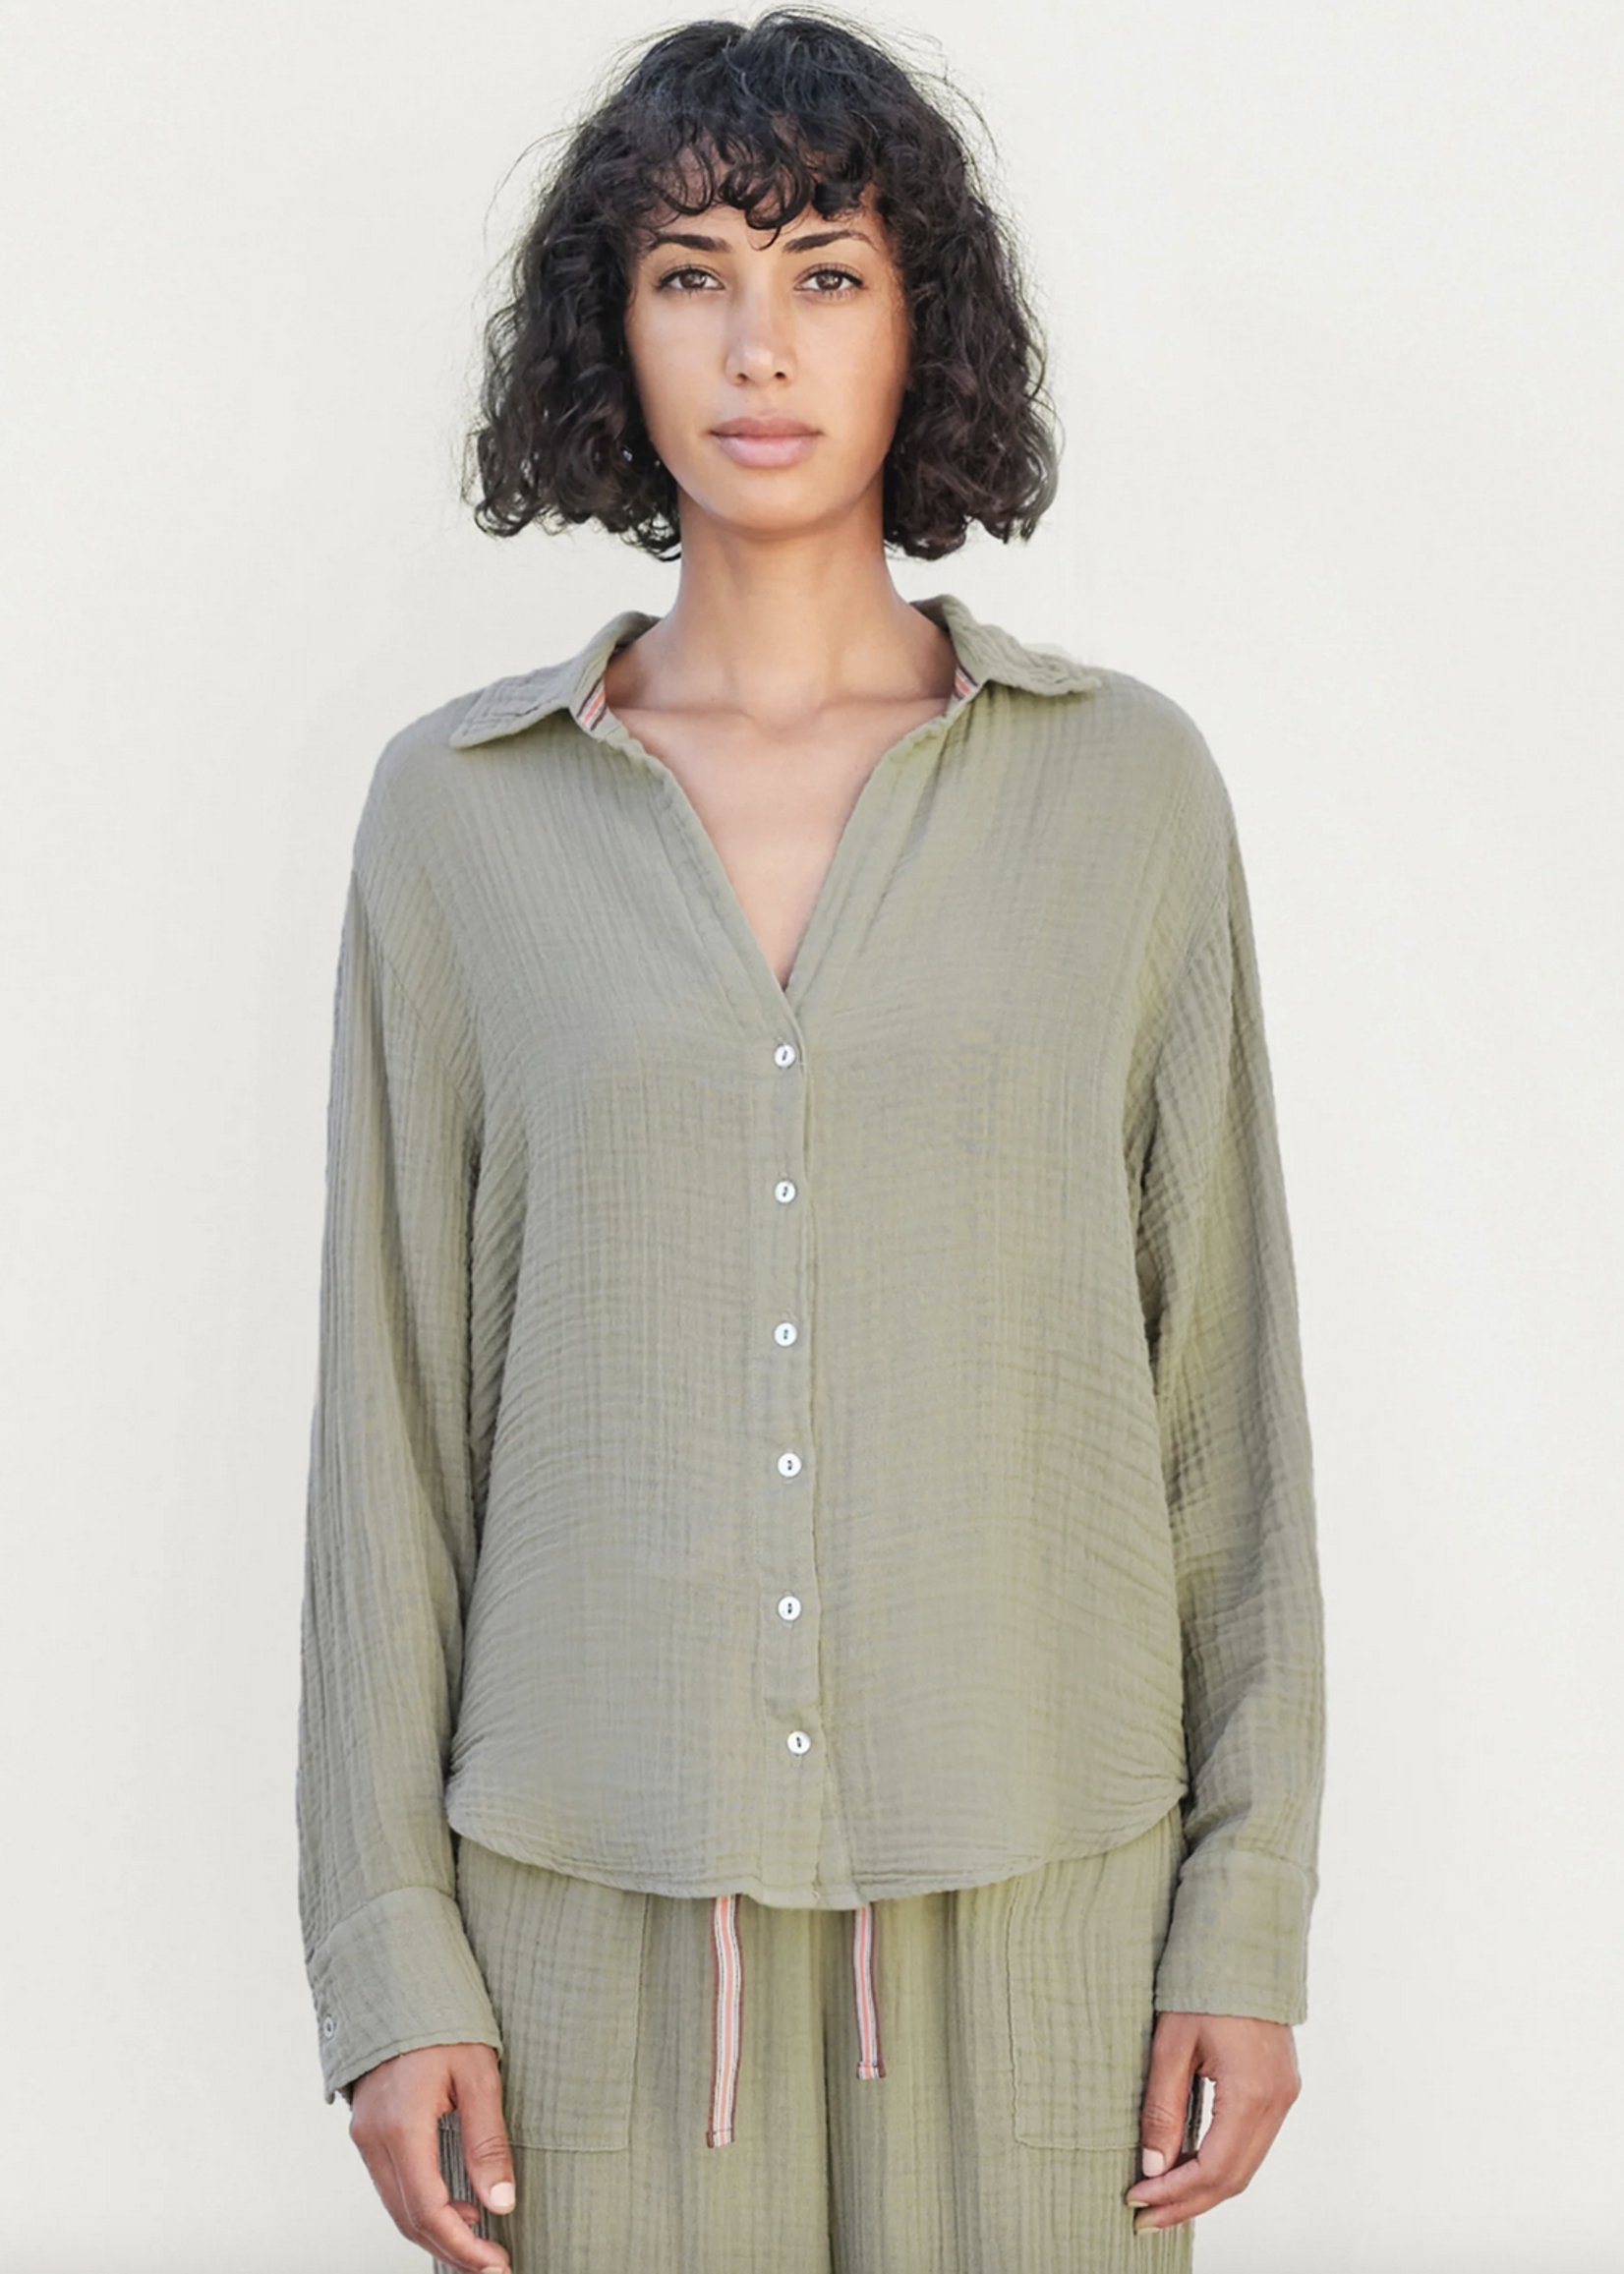 SUNDRY L/S BUTTON DOWN TOP